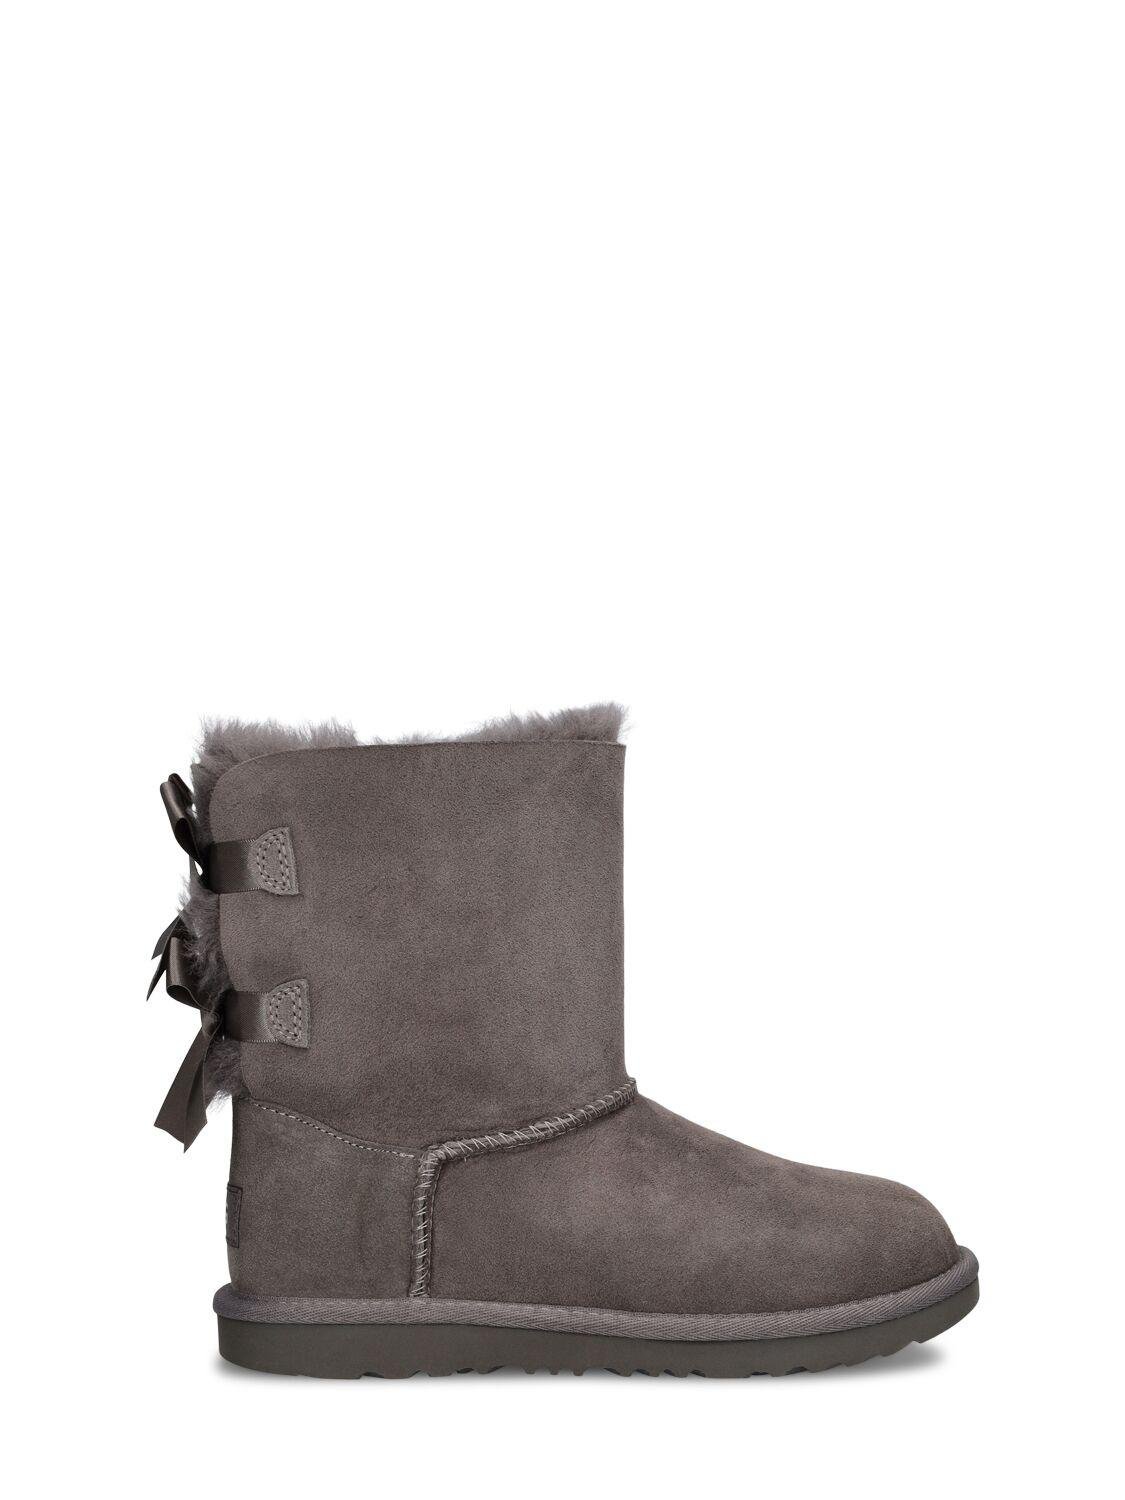 Bailey Bow Ii Shearling Boots by UGG